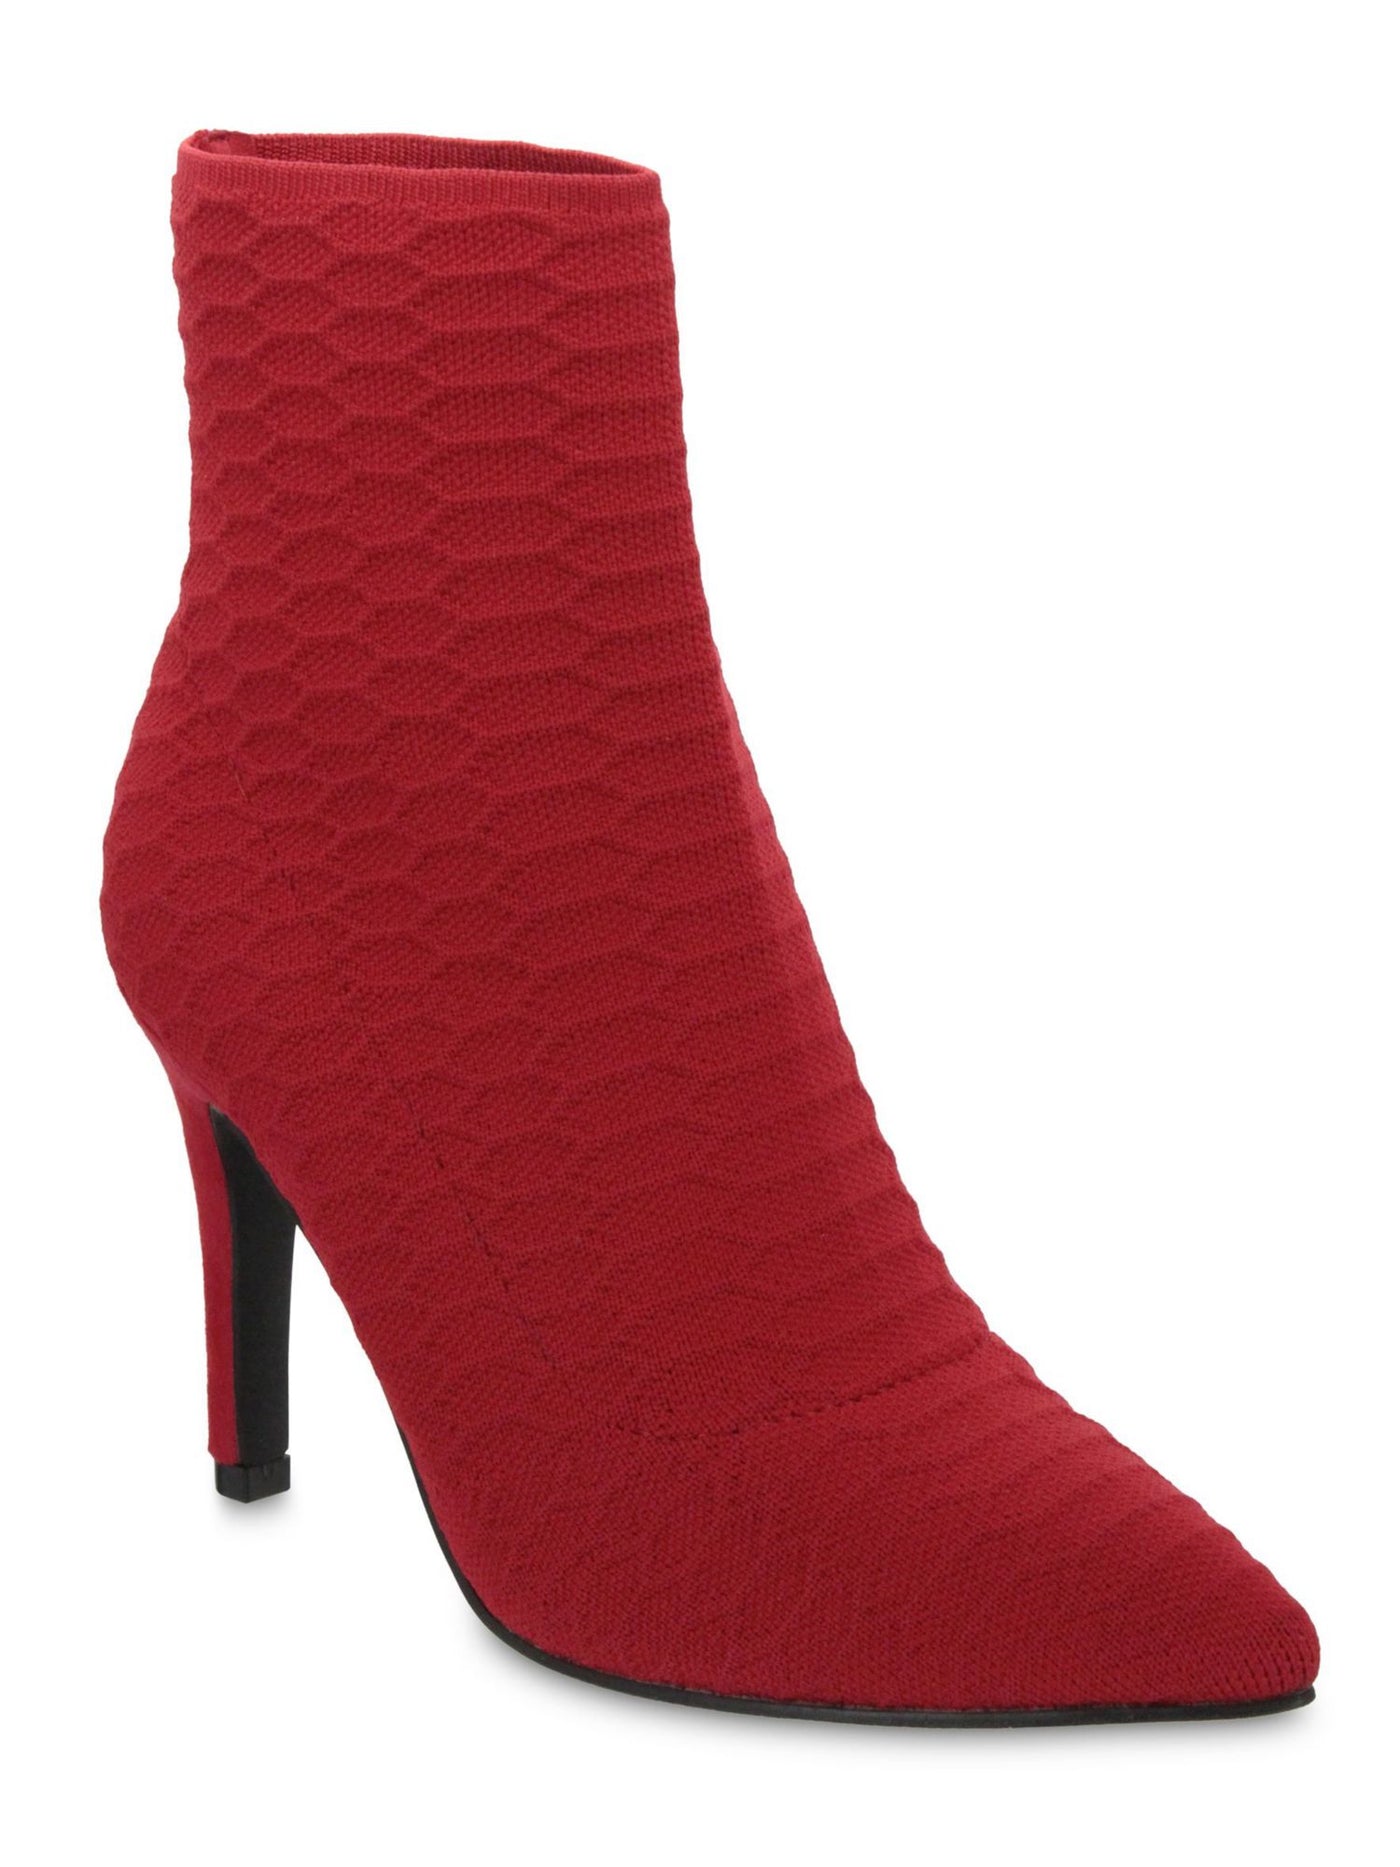 MIA Womens Red Patterned Cushioned Mckinley Pointy Toe Stiletto Dress Booties 8